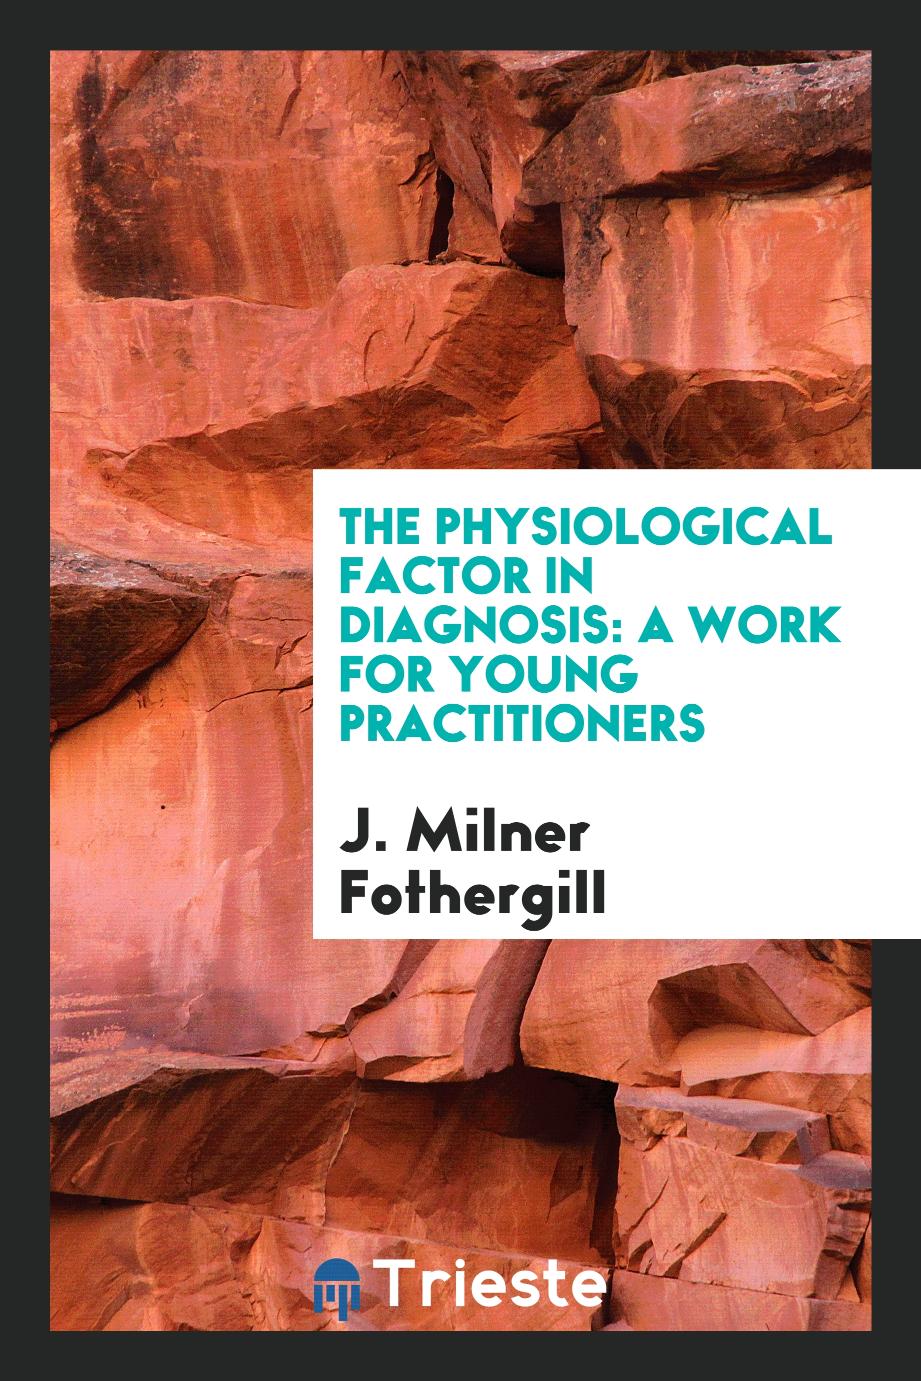 The Physiological Factor in Diagnosis: A Work for Young Practitioners